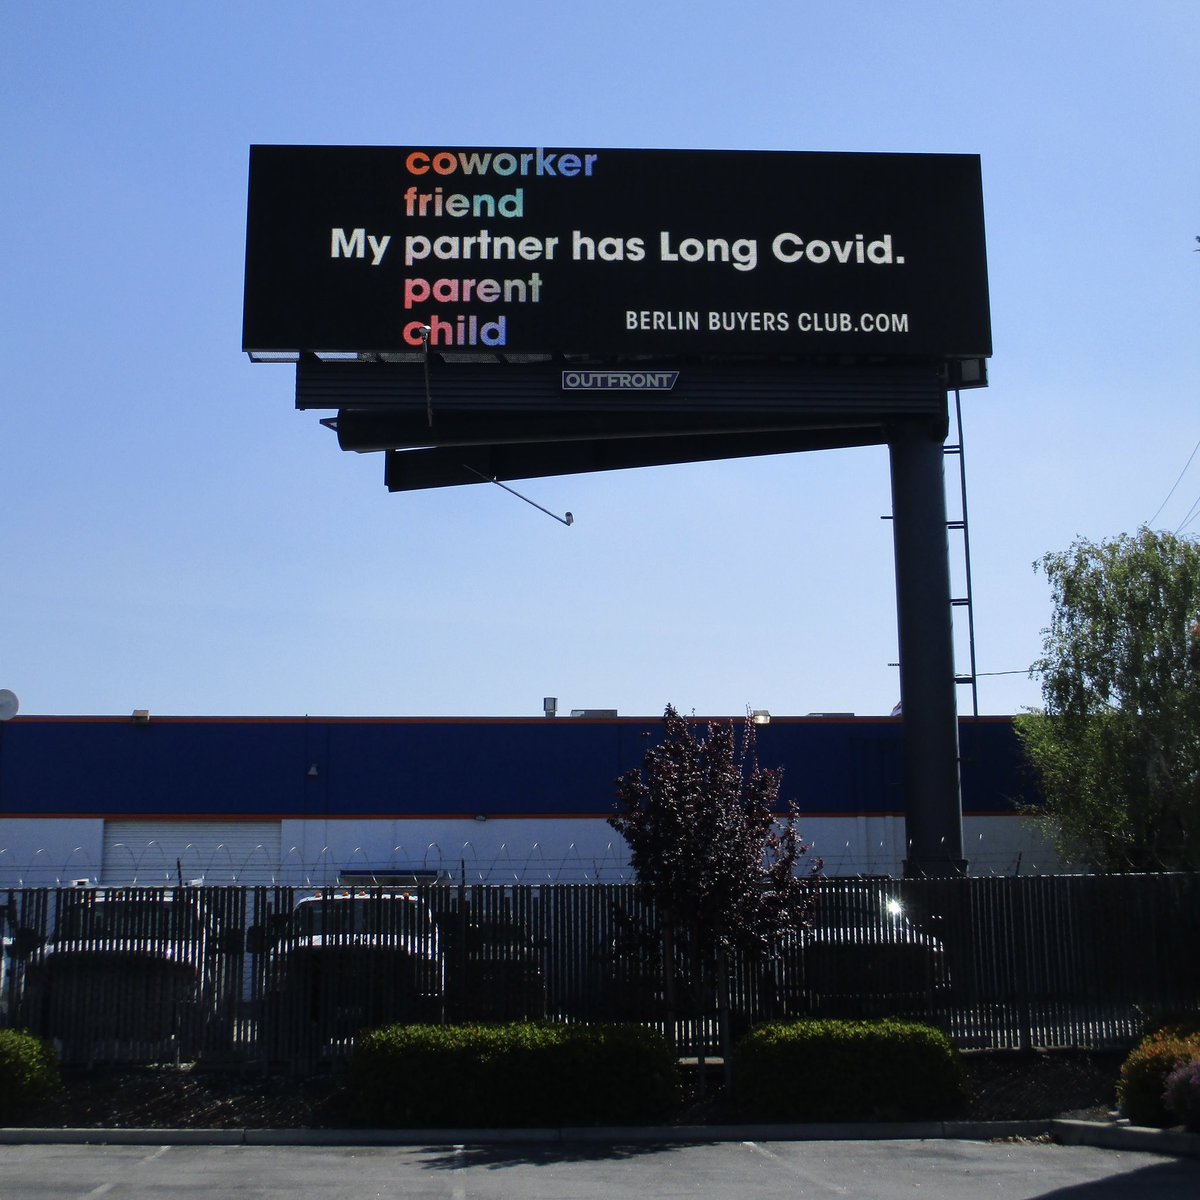 Update! The @BerlinBuyers billboard campaign is now finished :) Had over 69,000+ impressions & am excited to do another one in the Bay Area very soon🙏 #LongCovidAwareness #LongCovid